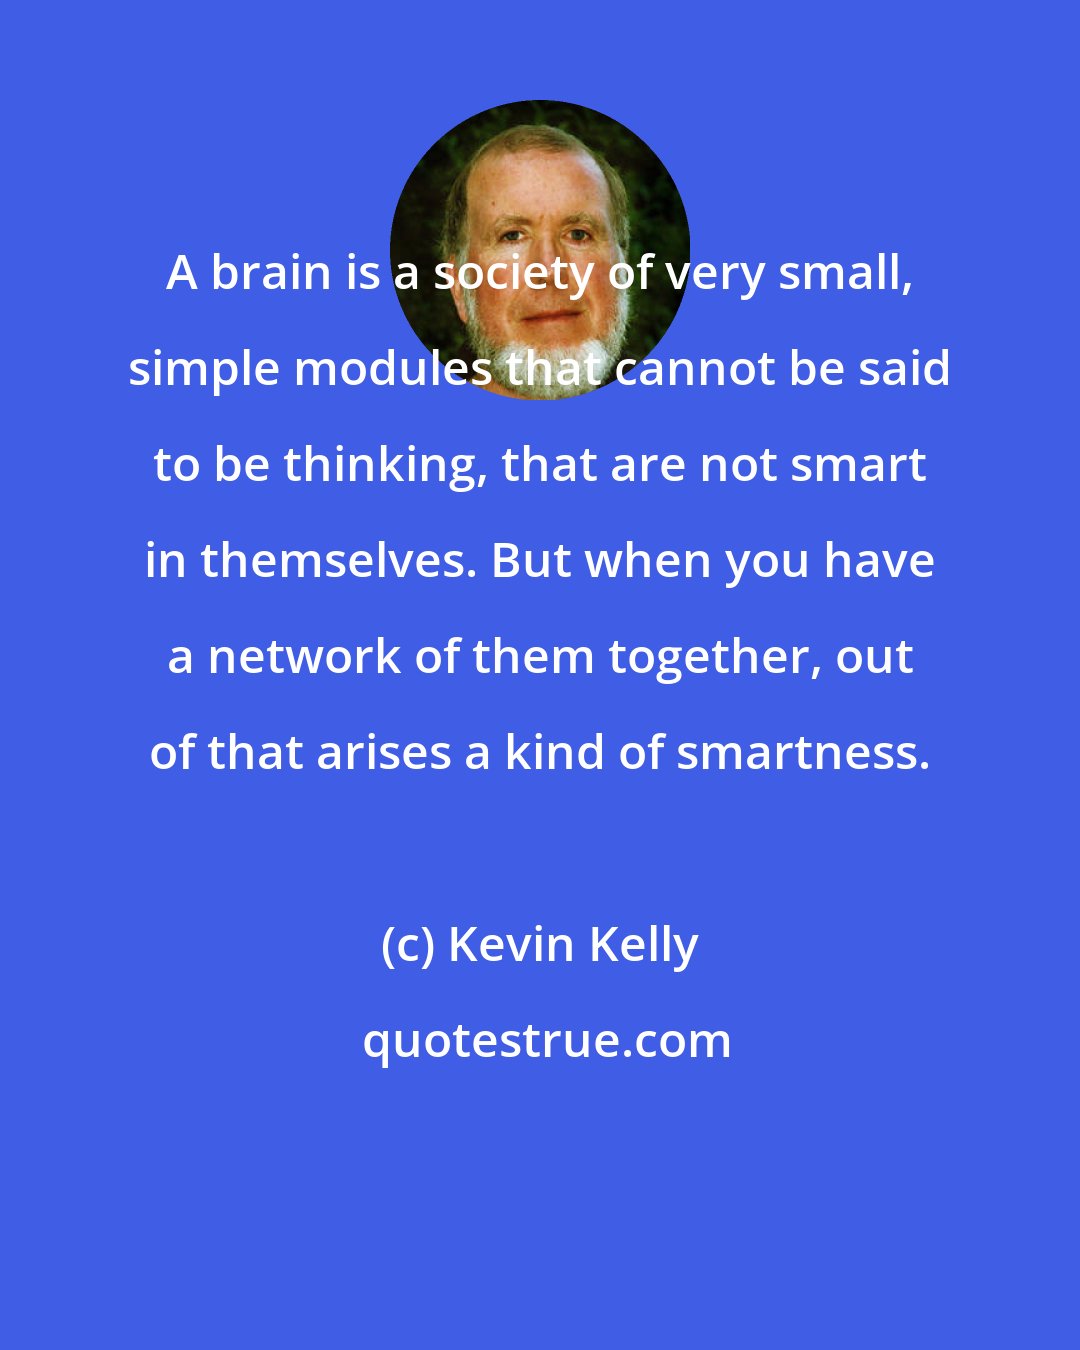 Kevin Kelly: A brain is a society of very small, simple modules that cannot be said to be thinking, that are not smart in themselves. But when you have a network of them together, out of that arises a kind of smartness.